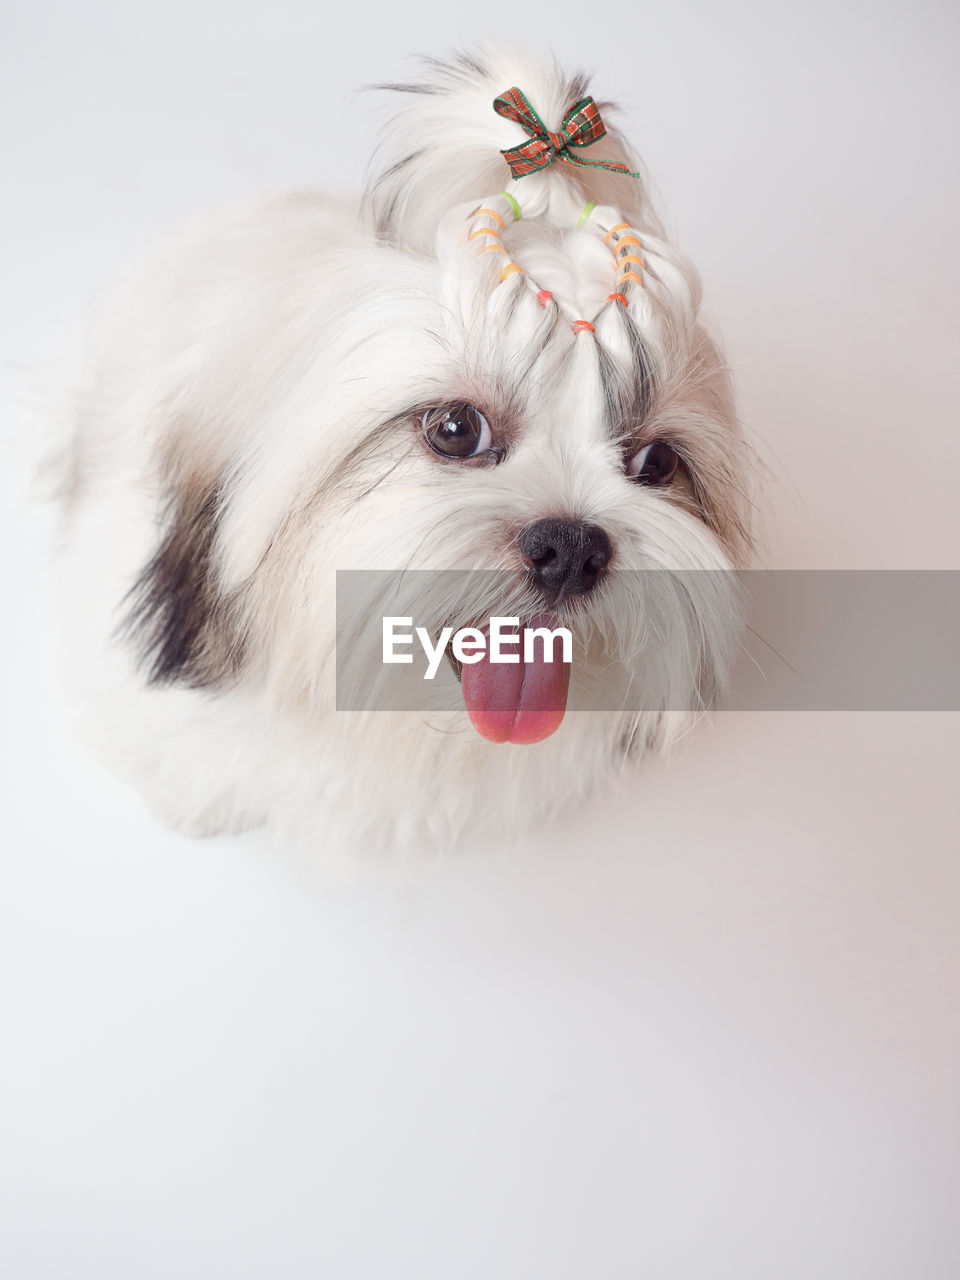 pet, one animal, animal, animal themes, domestic animals, mammal, pink, canine, dog, white, portrait, cute, studio shot, indoors, animal hair, lap dog, animal body part, close-up, no people, looking at camera, white background, carnivore, maltese, skin, flower, young animal